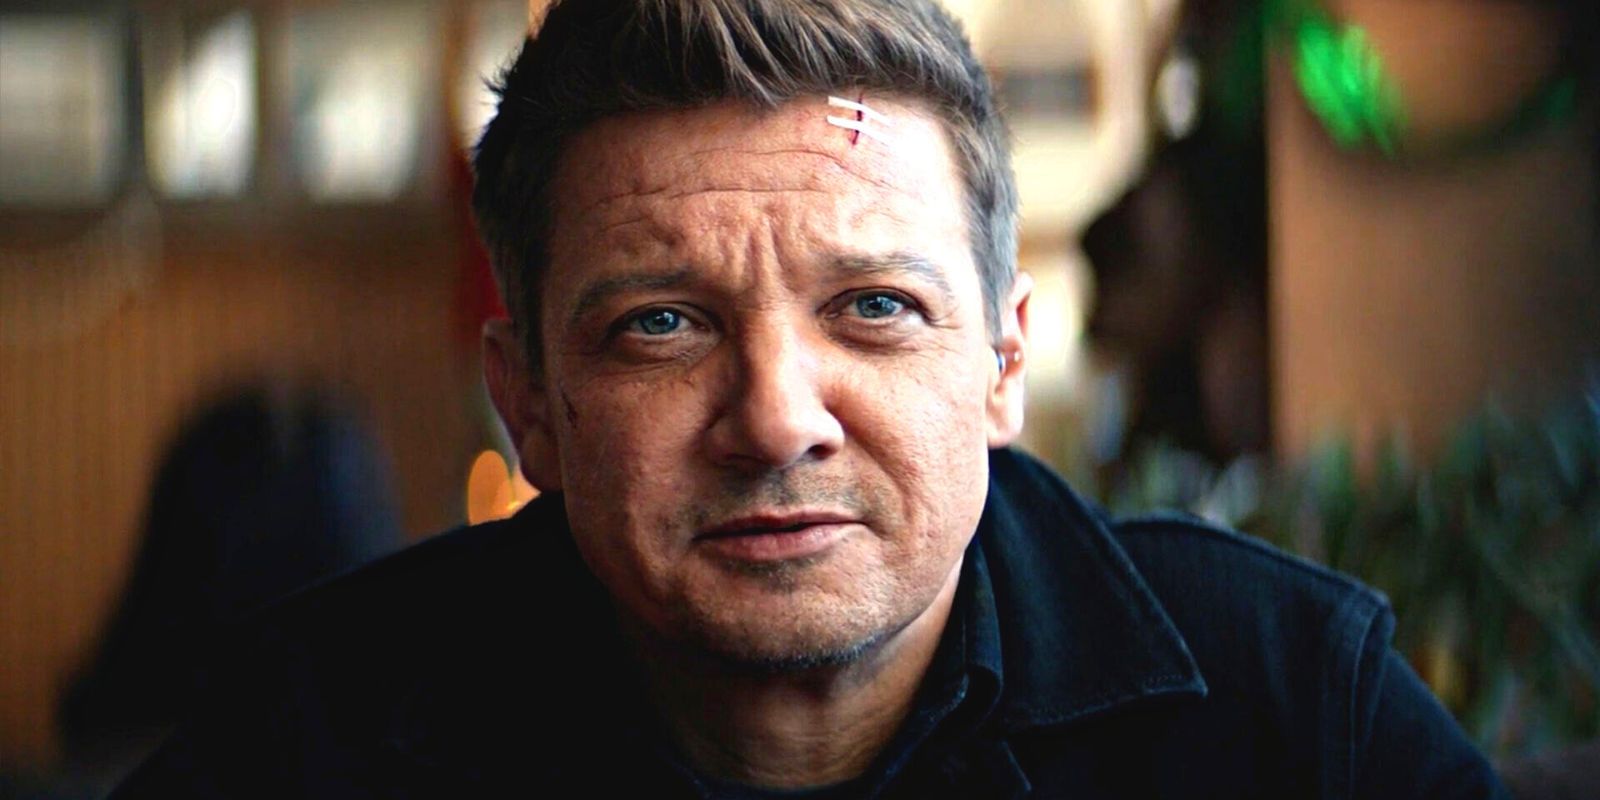 Jeremy Renner with two band-aids on his forehead over a nasty cut